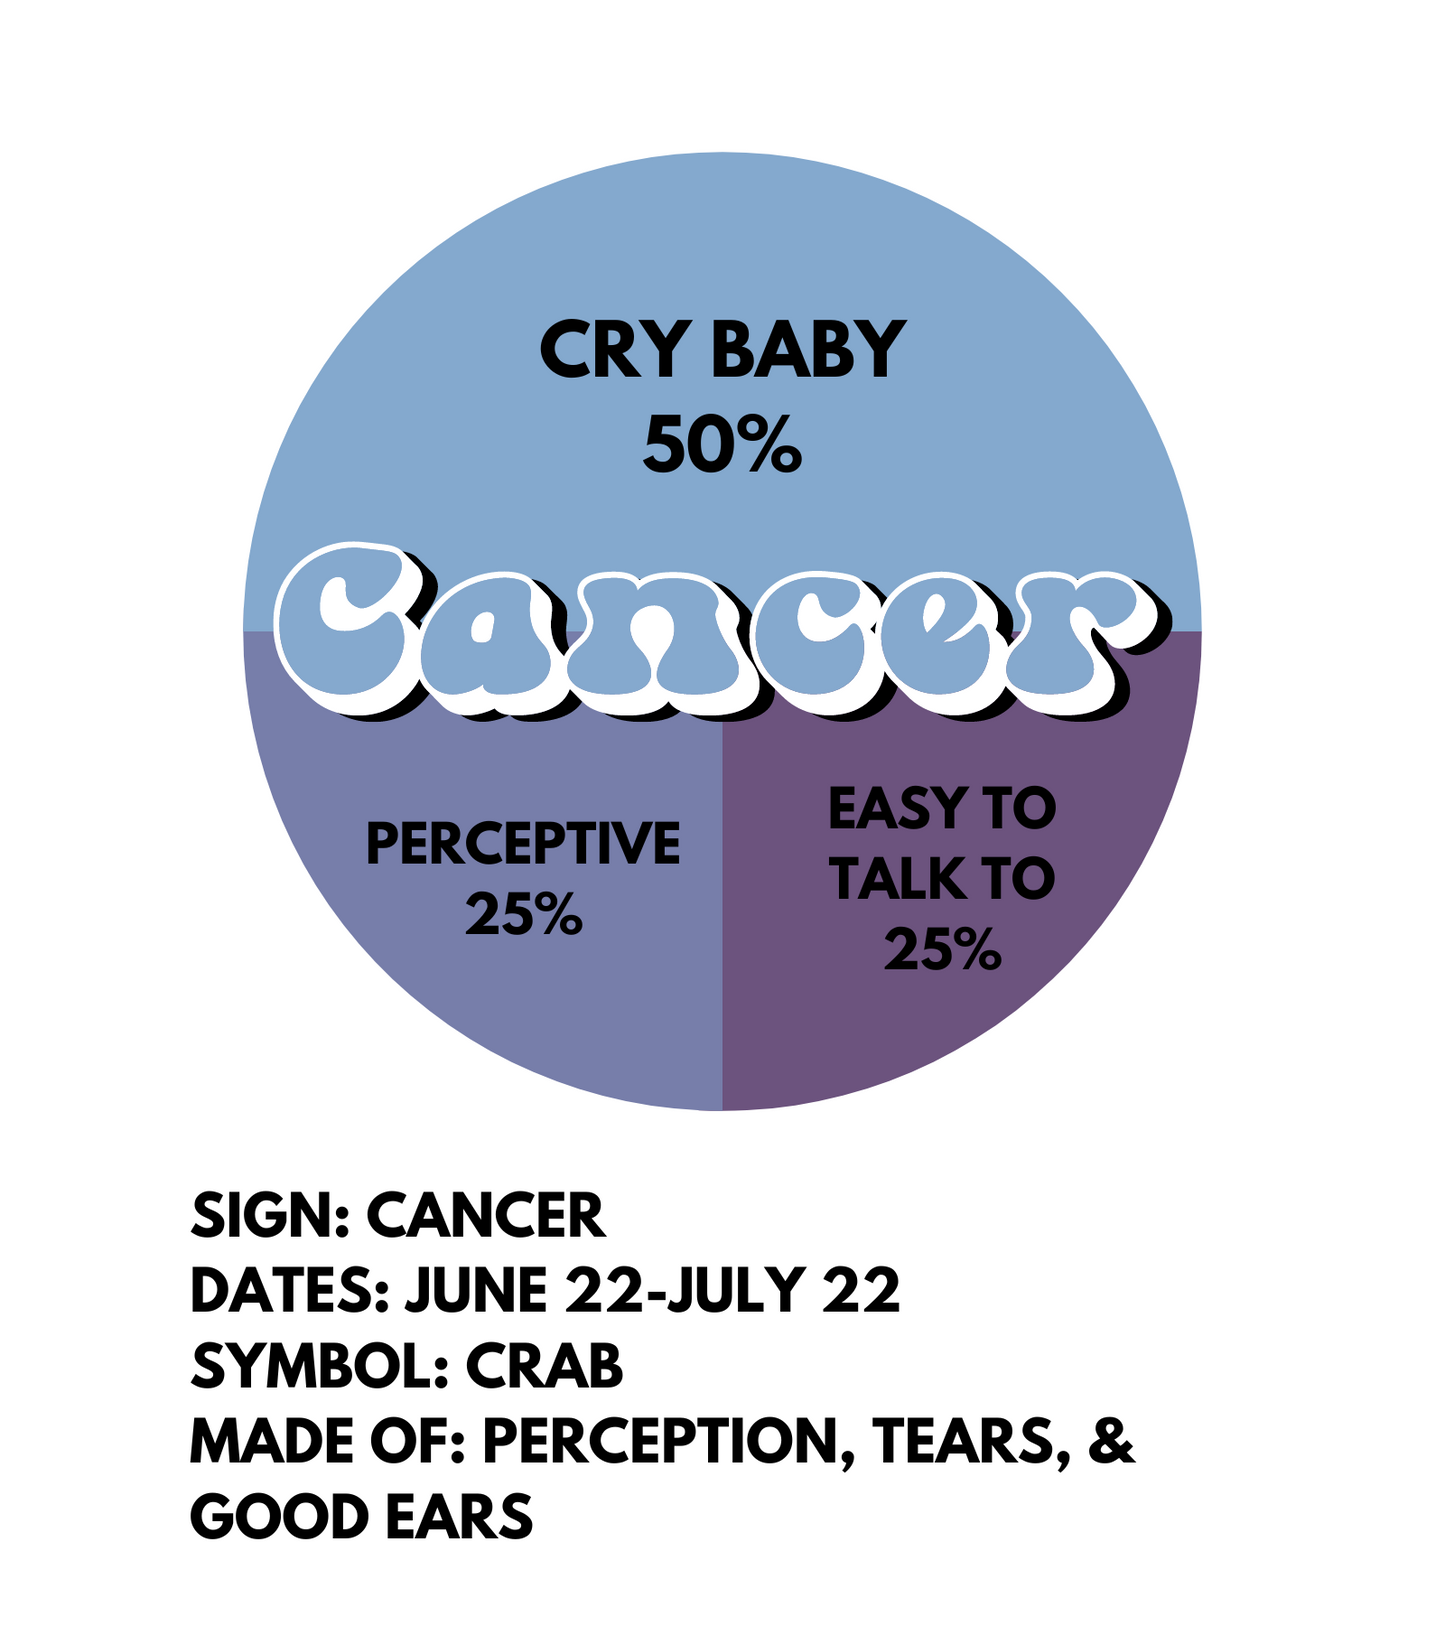 A circular sticker design of a pie chart, with the word Cancer in the middle. The pie chart is broken up into 3 sections: 50% cry baby, 25% perceptive, 25% easy to talk to. Underneath the design there is the text: SIGN: CANCER DATES: JUNE 22-JULY 22 SYMBOL: CRAB MADE OF: PERCEPTION, TEARS, & GOOD EARS